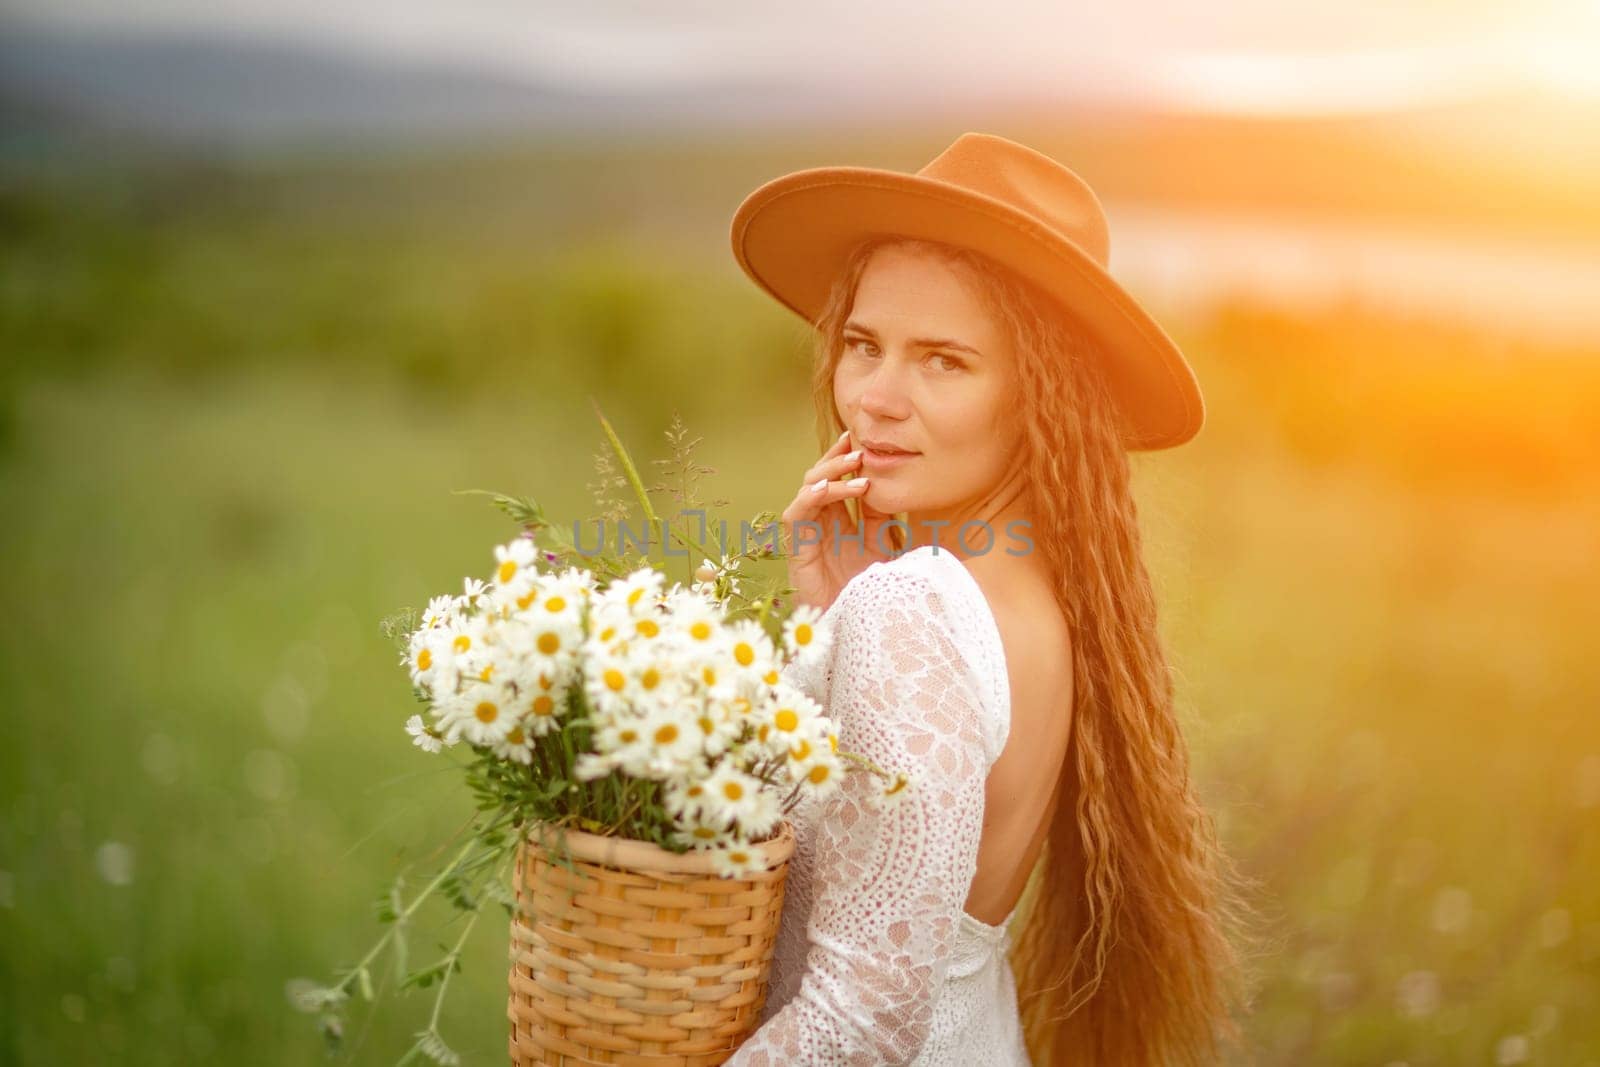 A middle-aged woman in a white dress and brown hat stands on a green field and holds a basket in her hands with a large bouquet of daisies. In the background there are mountains and a lake